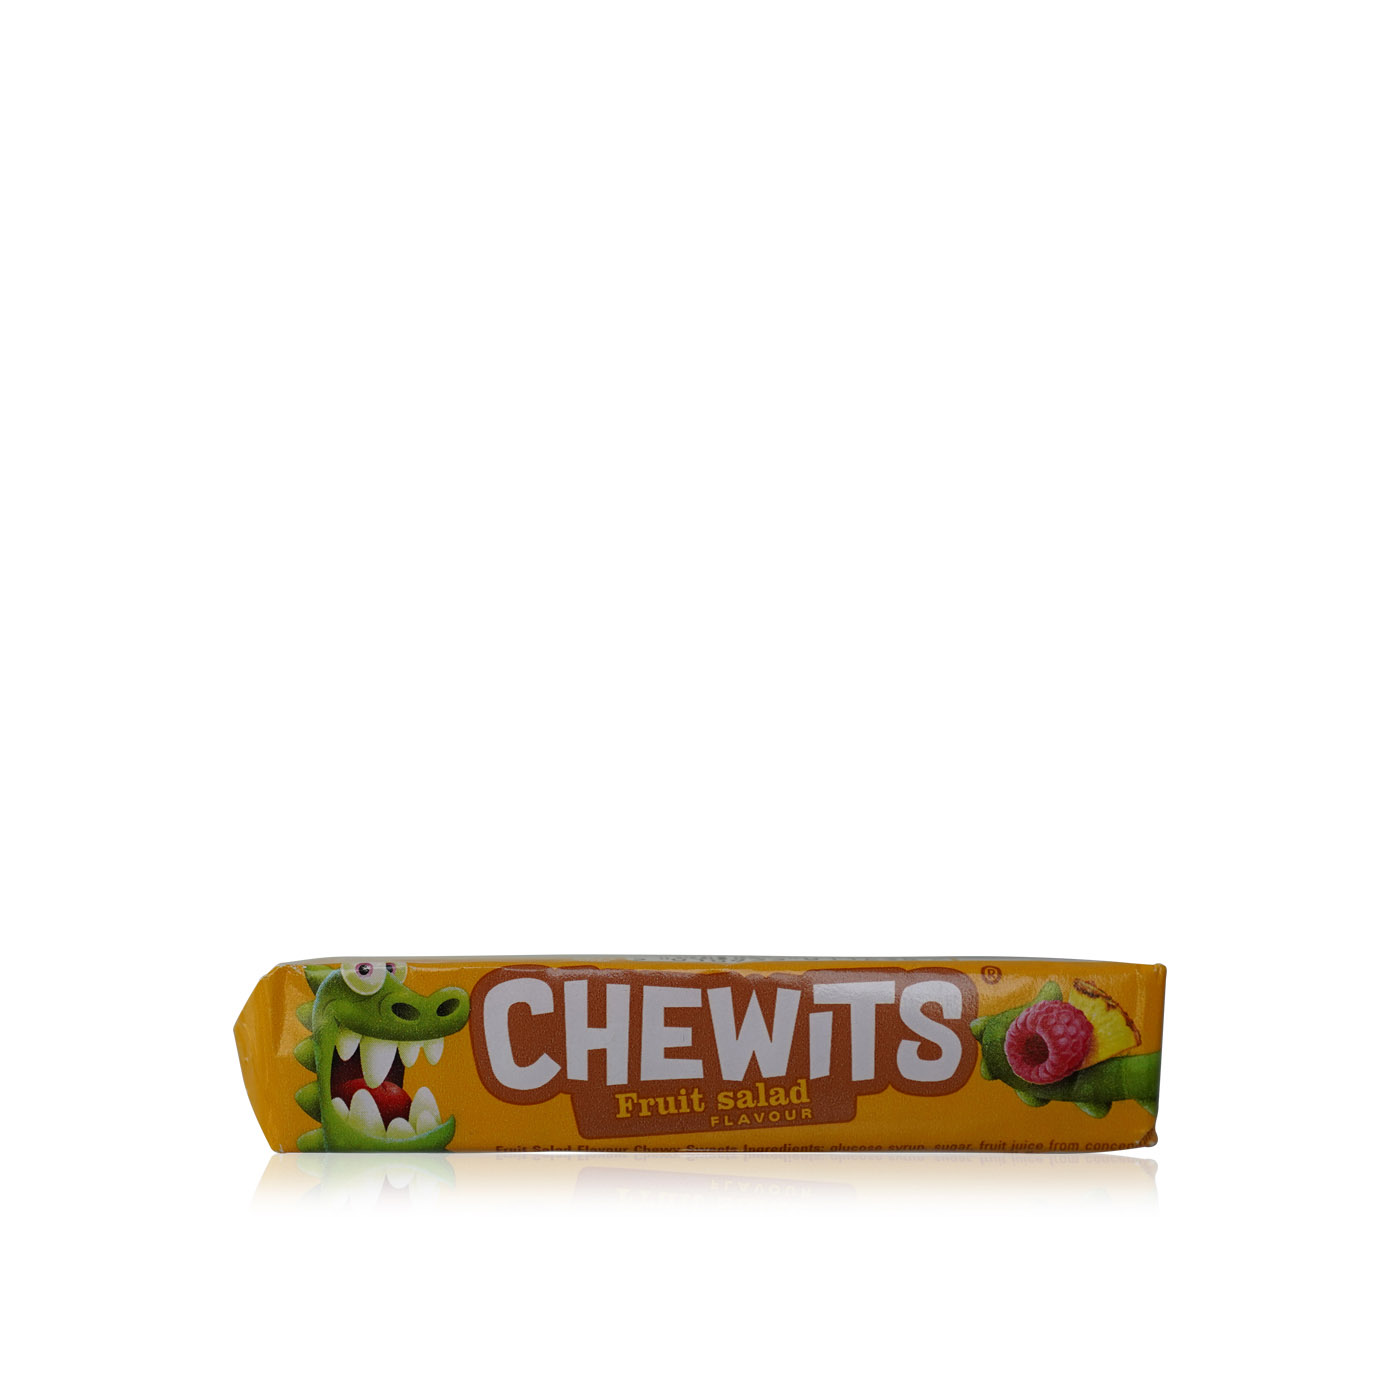 Chewits chewy sweets fruit salad 30g - Waitrose UAE & Partners